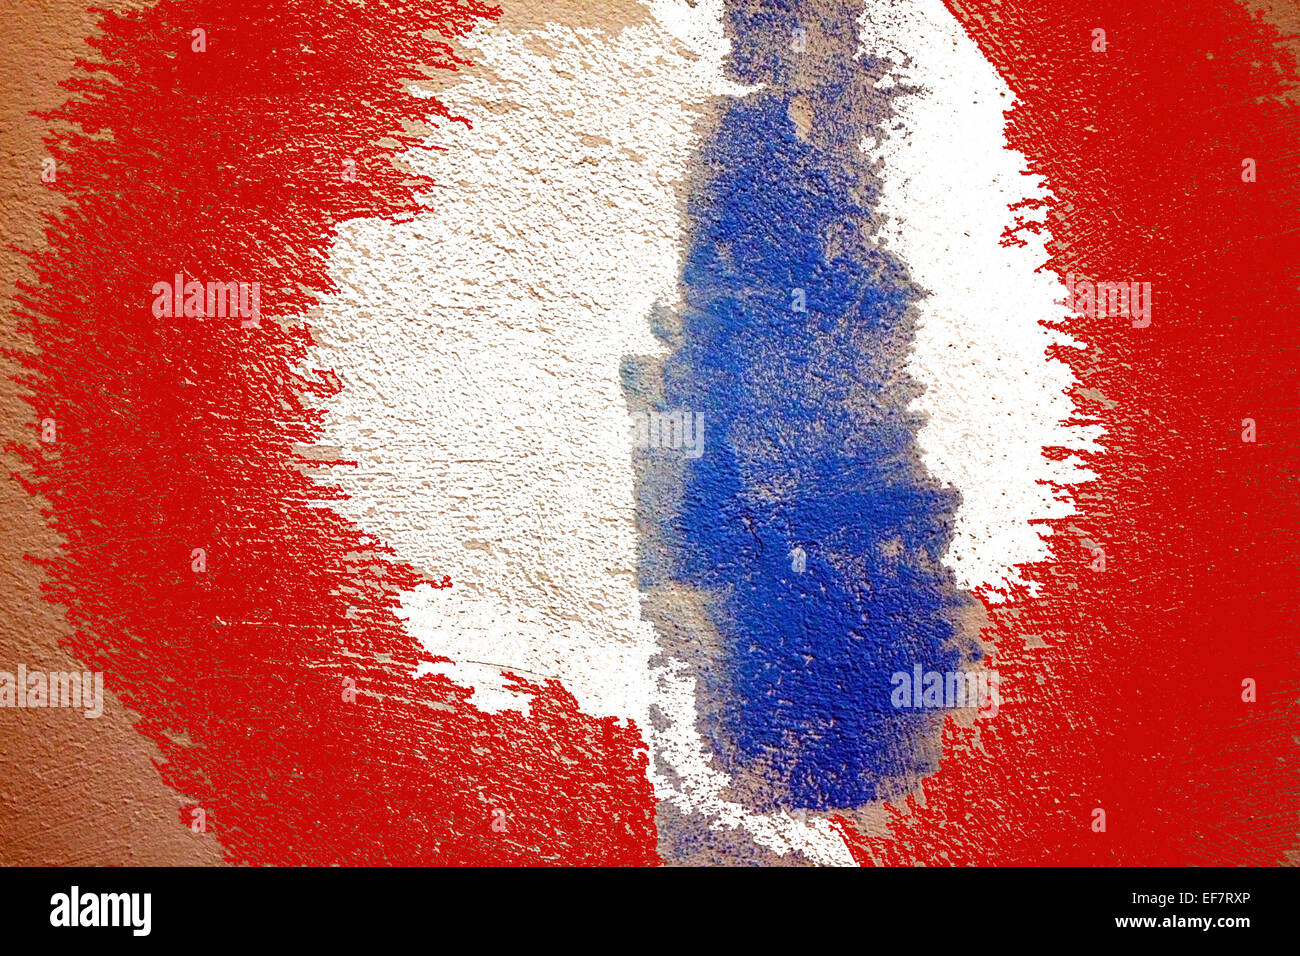 Tricolor. Red, blue and white spots of paint on a plastered wall Stock Photo